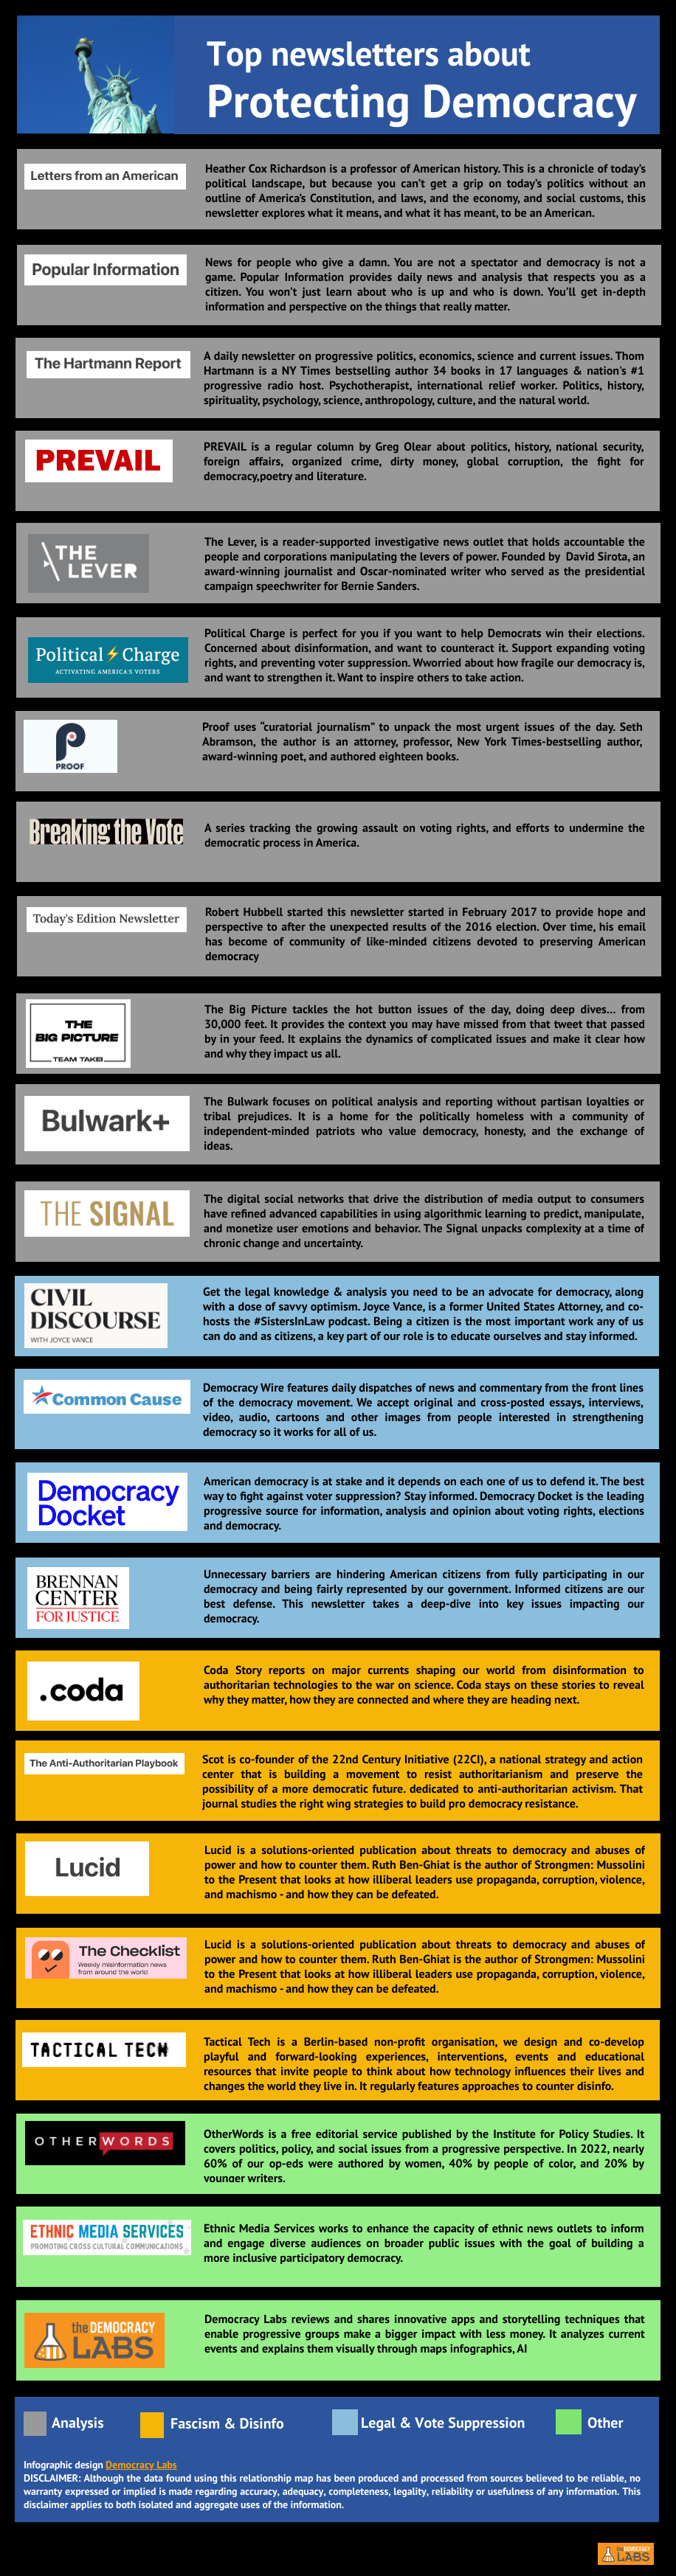 American democracy is at stake and it depends on each one of us to defend it. The best way to fight against voter suppression? Stay informed with these newsletters.